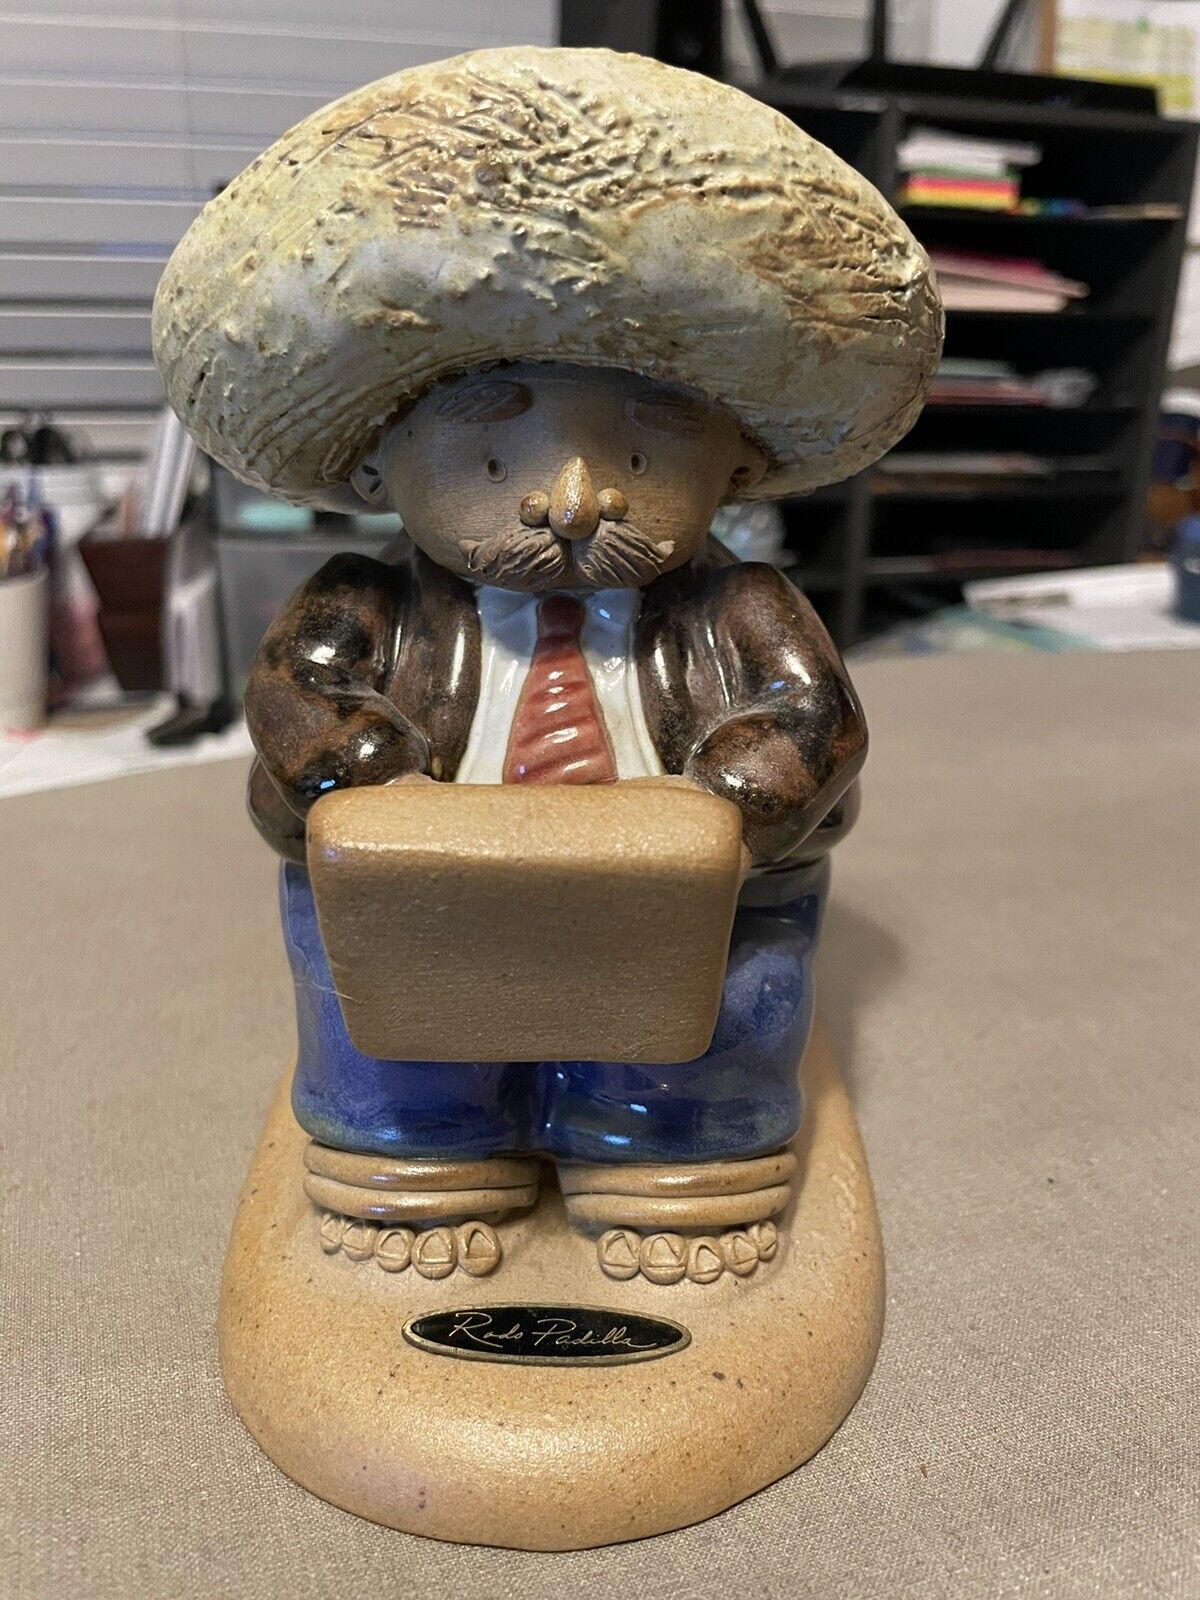 FATHERS DAY GIFT Rodo Padilla Handmade Sculpture of a Worker on his Laptop